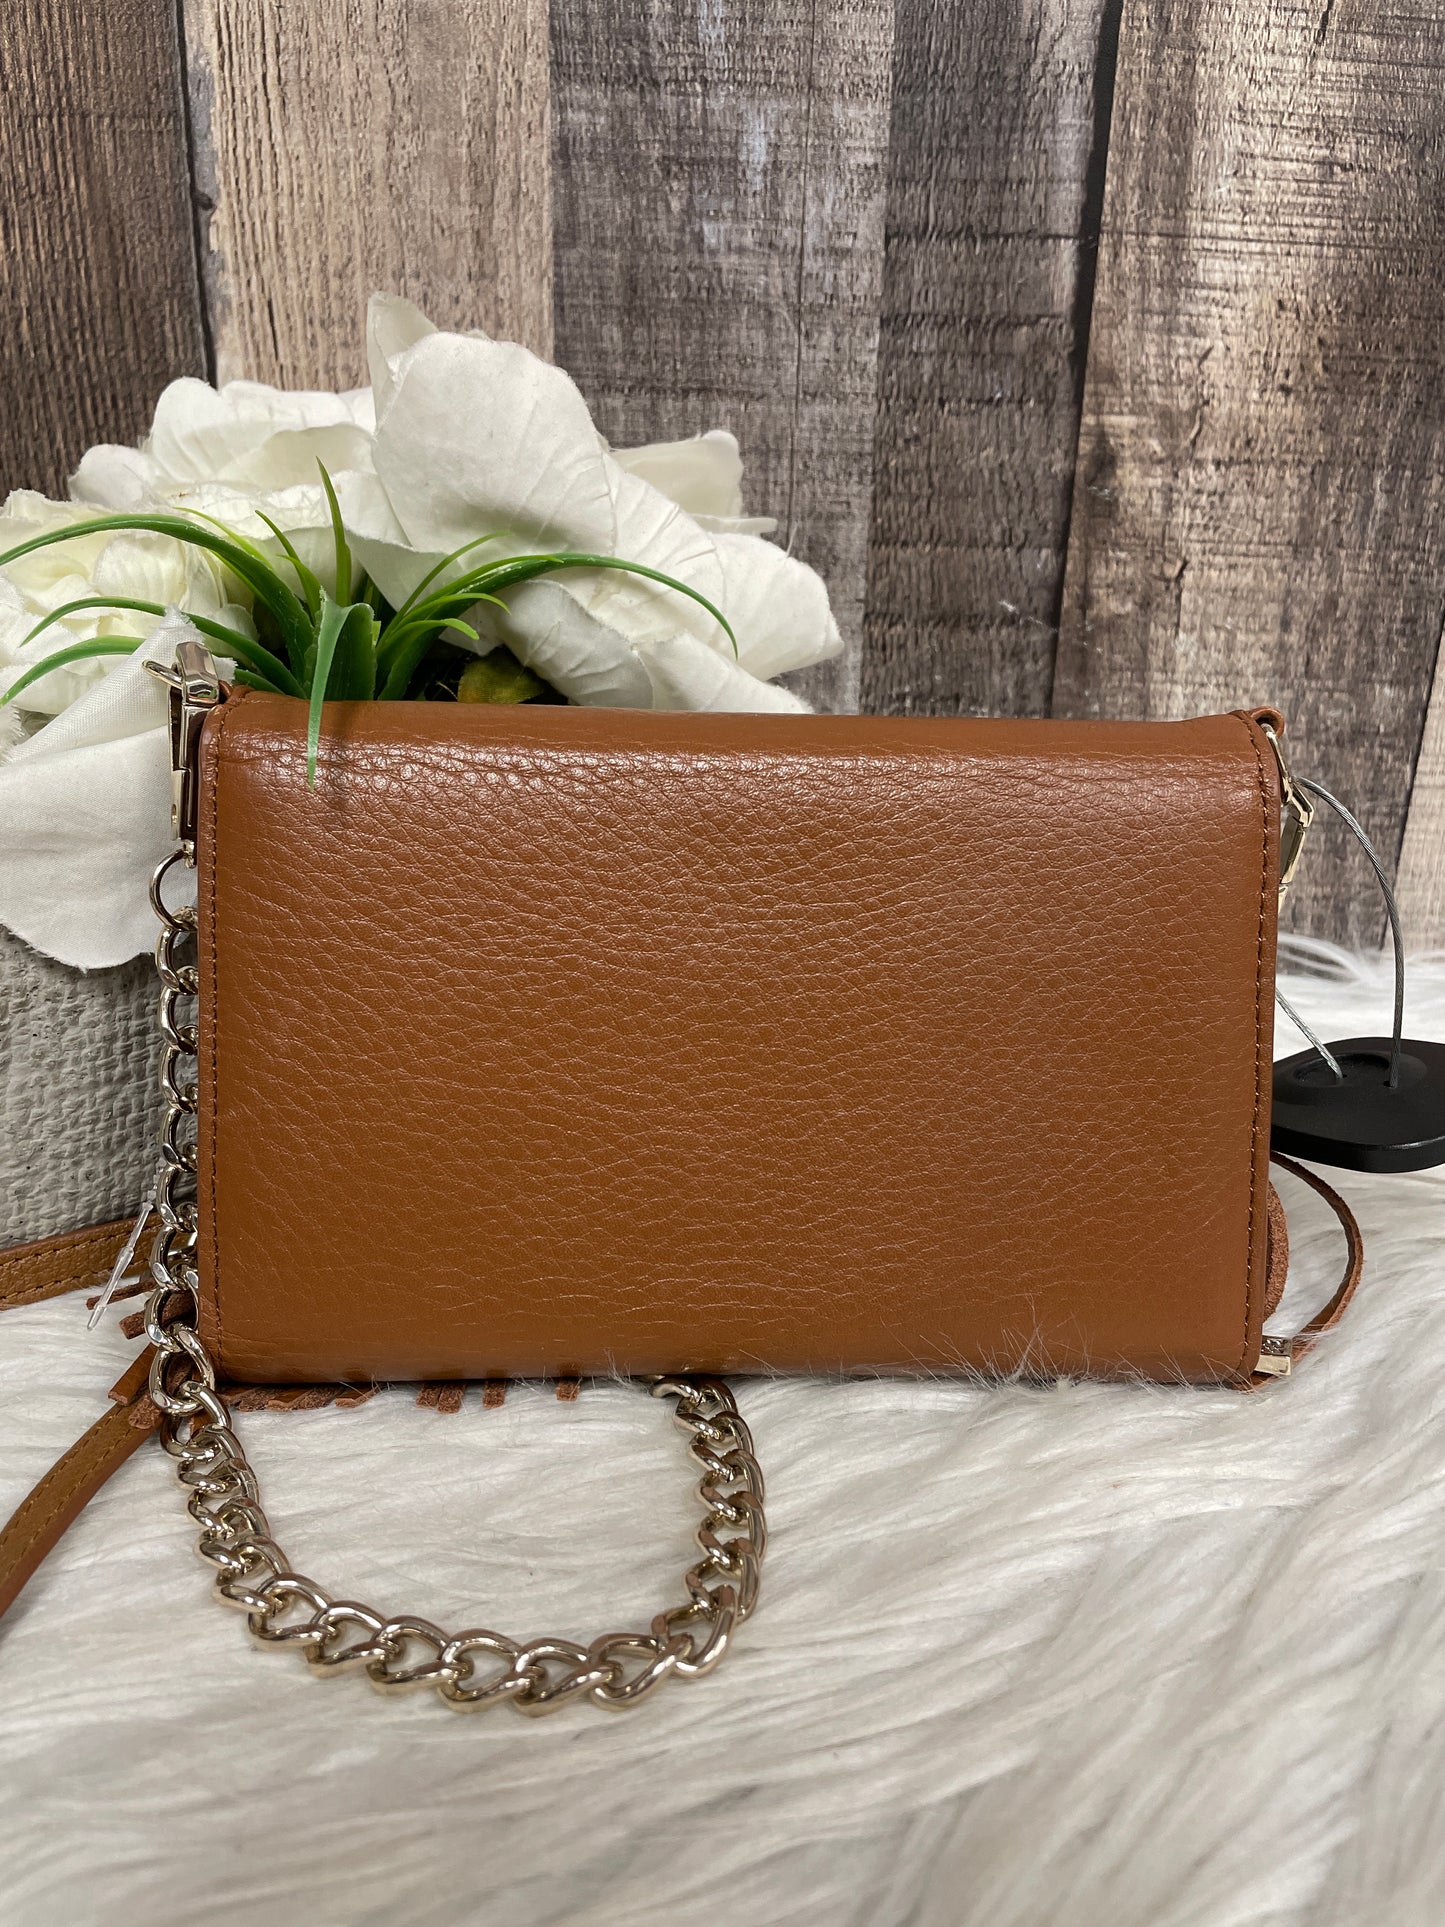 Crossbody Leather By Rebecca Minkoff  Size: Small